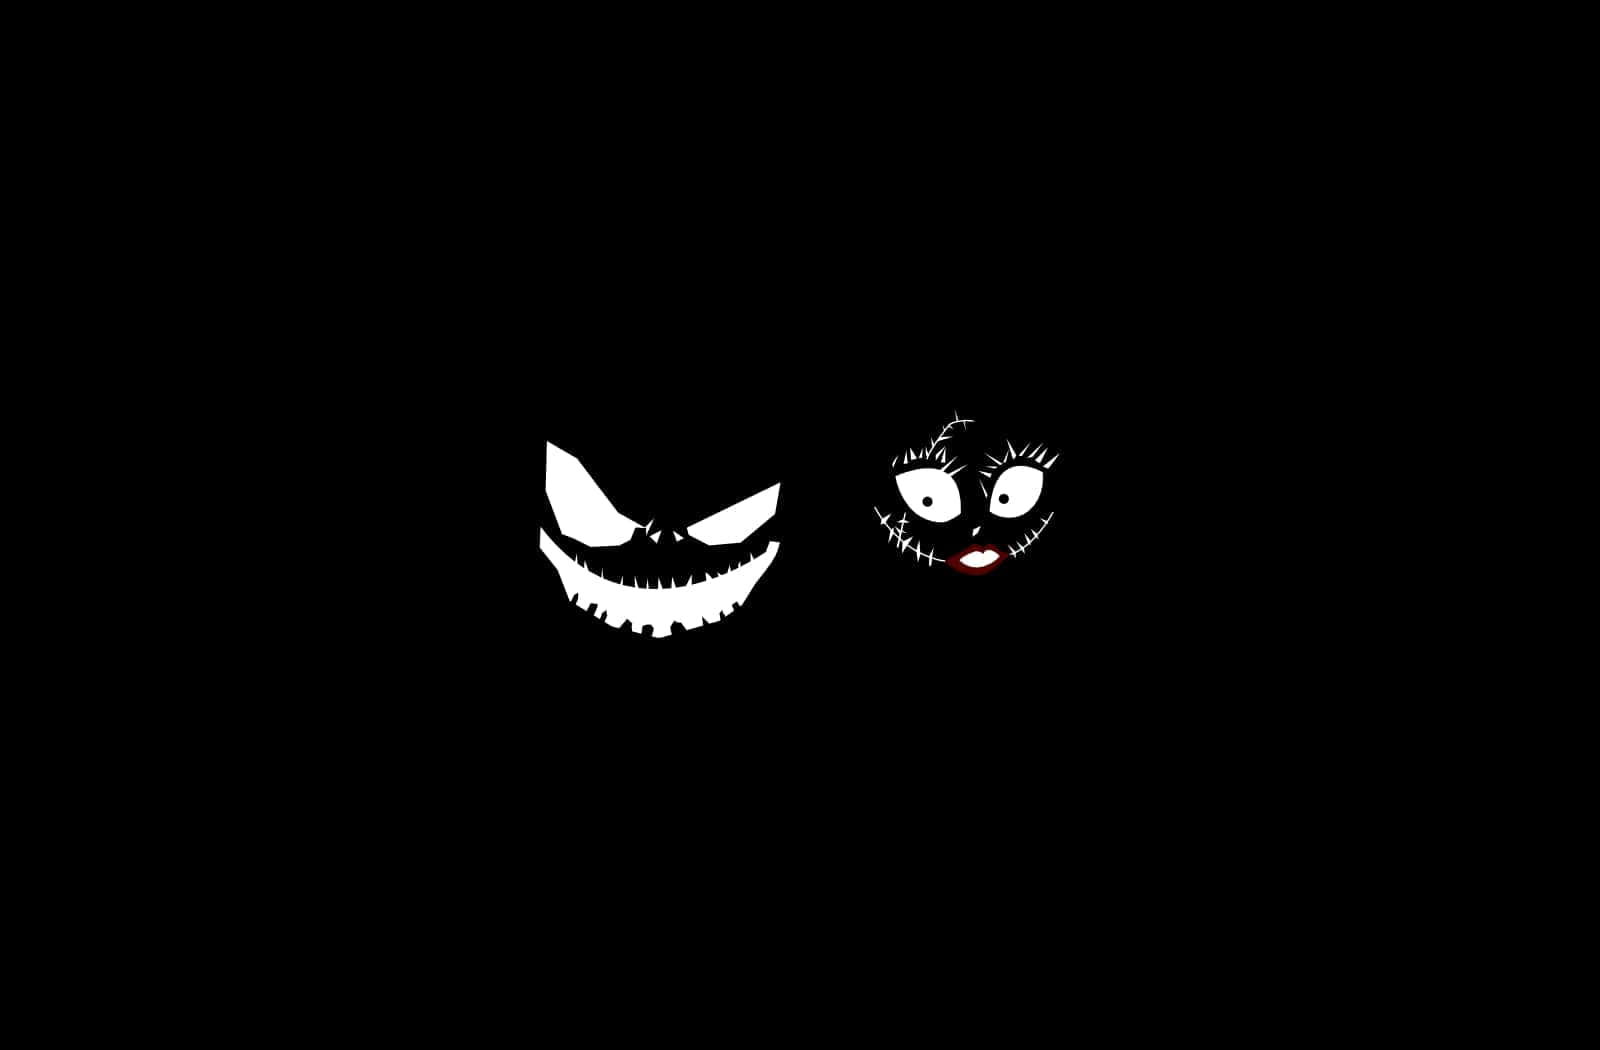 Jackand Sally Smiling Faces Wallpaper